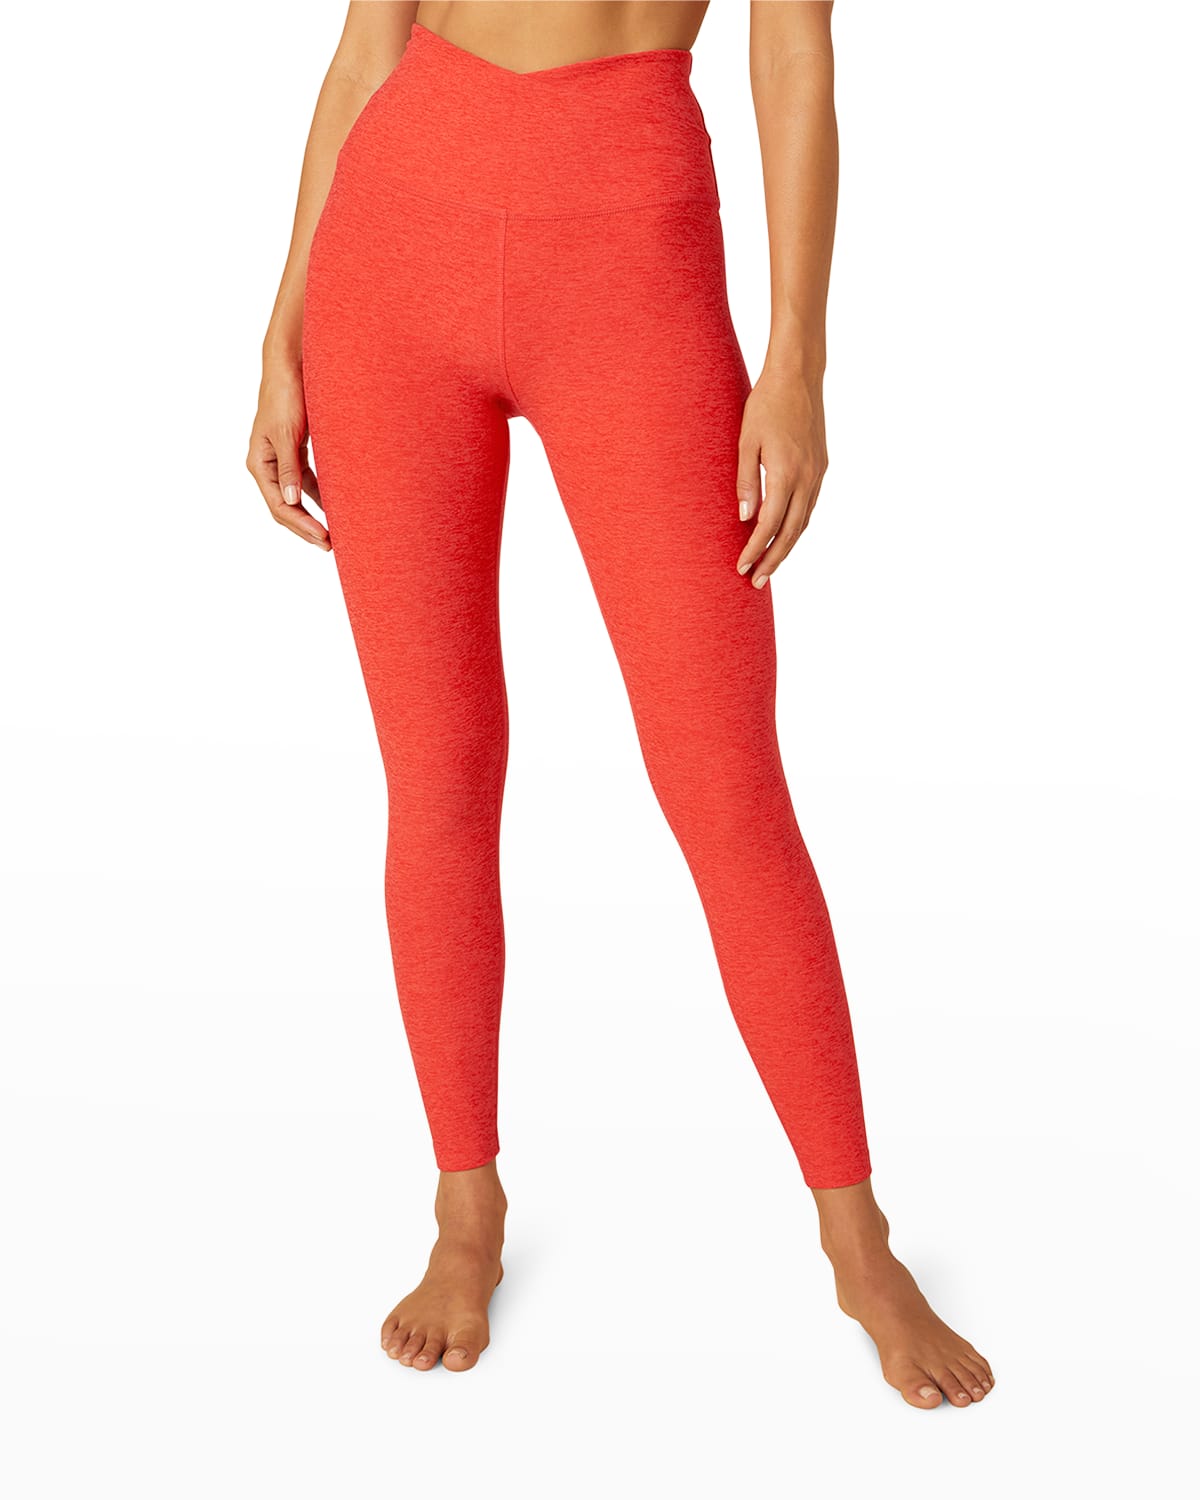 At Your Leisure High-Waist Leggings